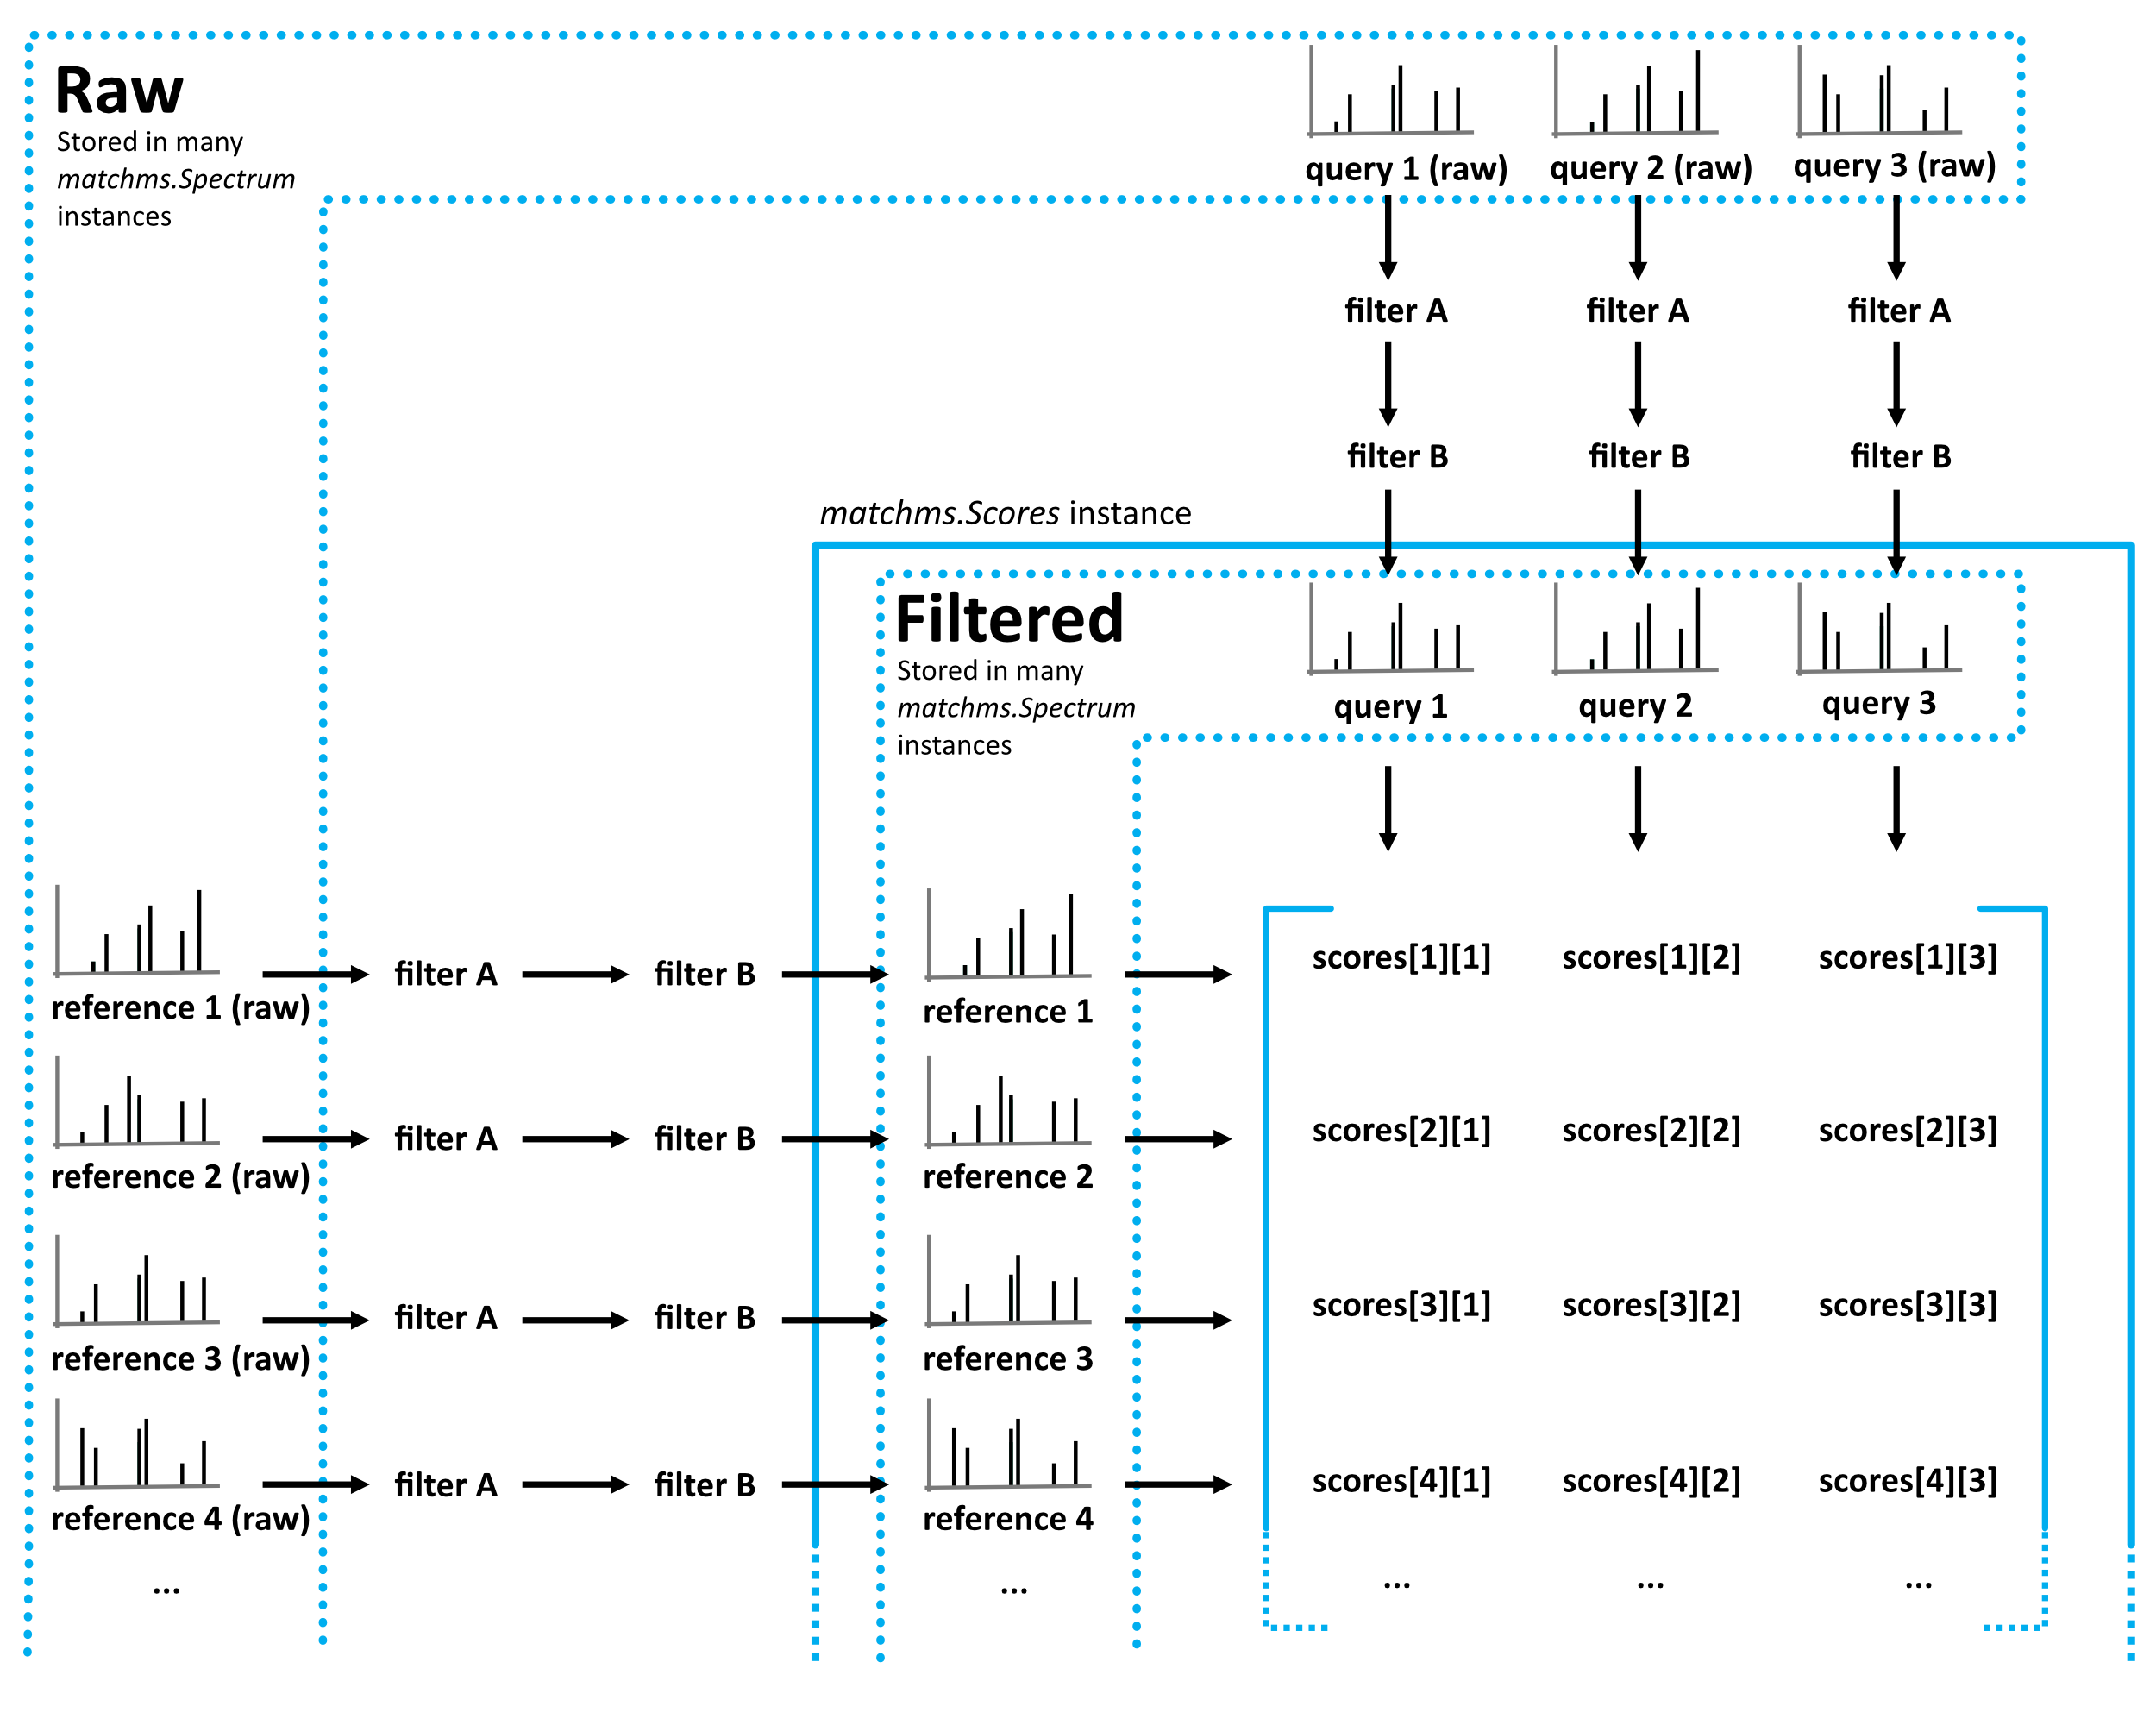 Flowchart of matchms workflow. Reference and query spectrums are filtered using the same set of set filters (here: filter A and filter B). Once filtered, every reference spectrum is compared to every query spectrum using the matchms.Scores object.